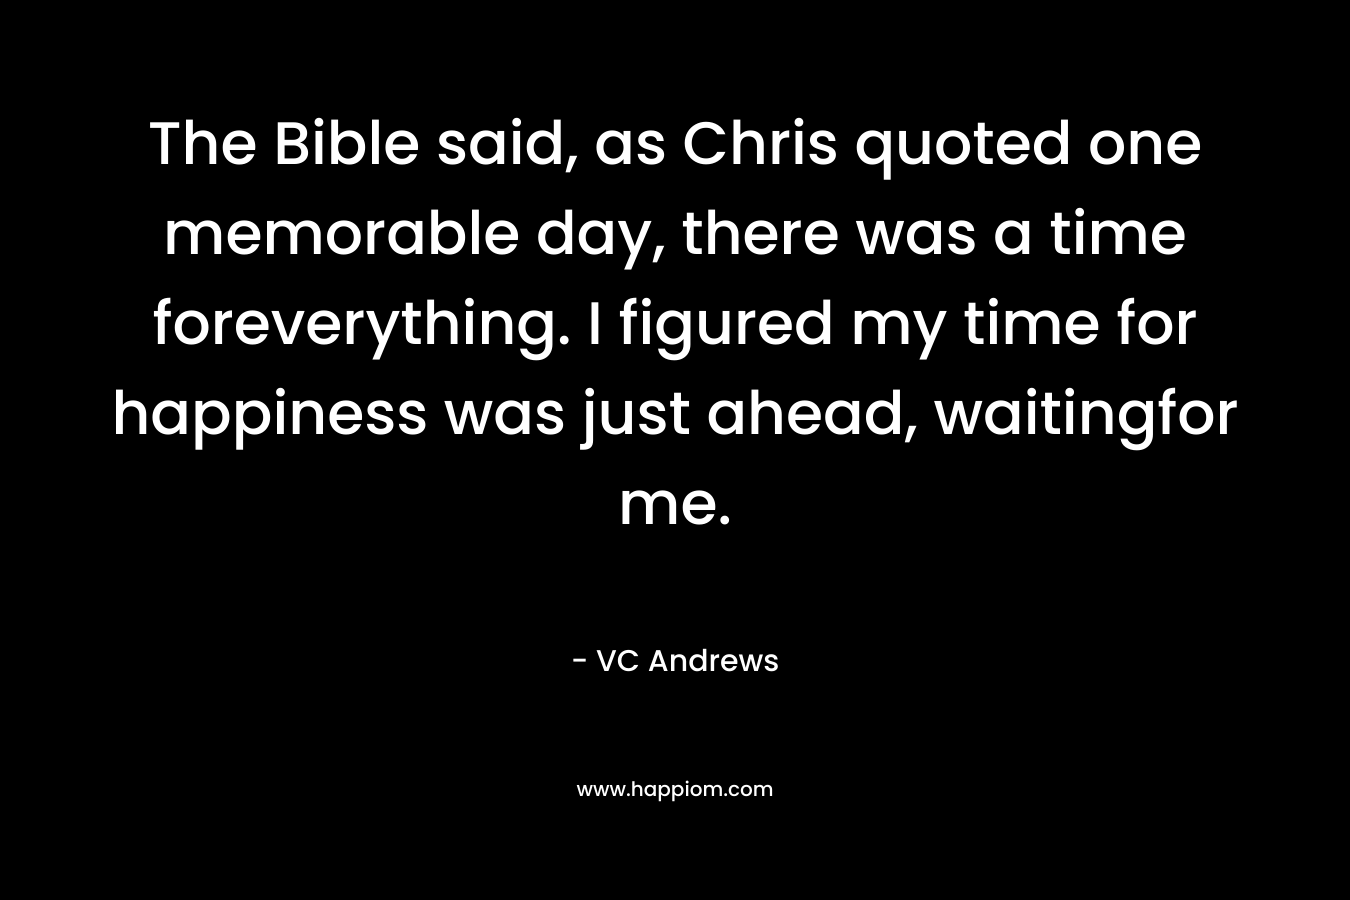 The Bible said, as Chris quoted one memorable day, there was a time foreverything. I figured my time for happiness was just ahead, waitingfor me. – VC Andrews